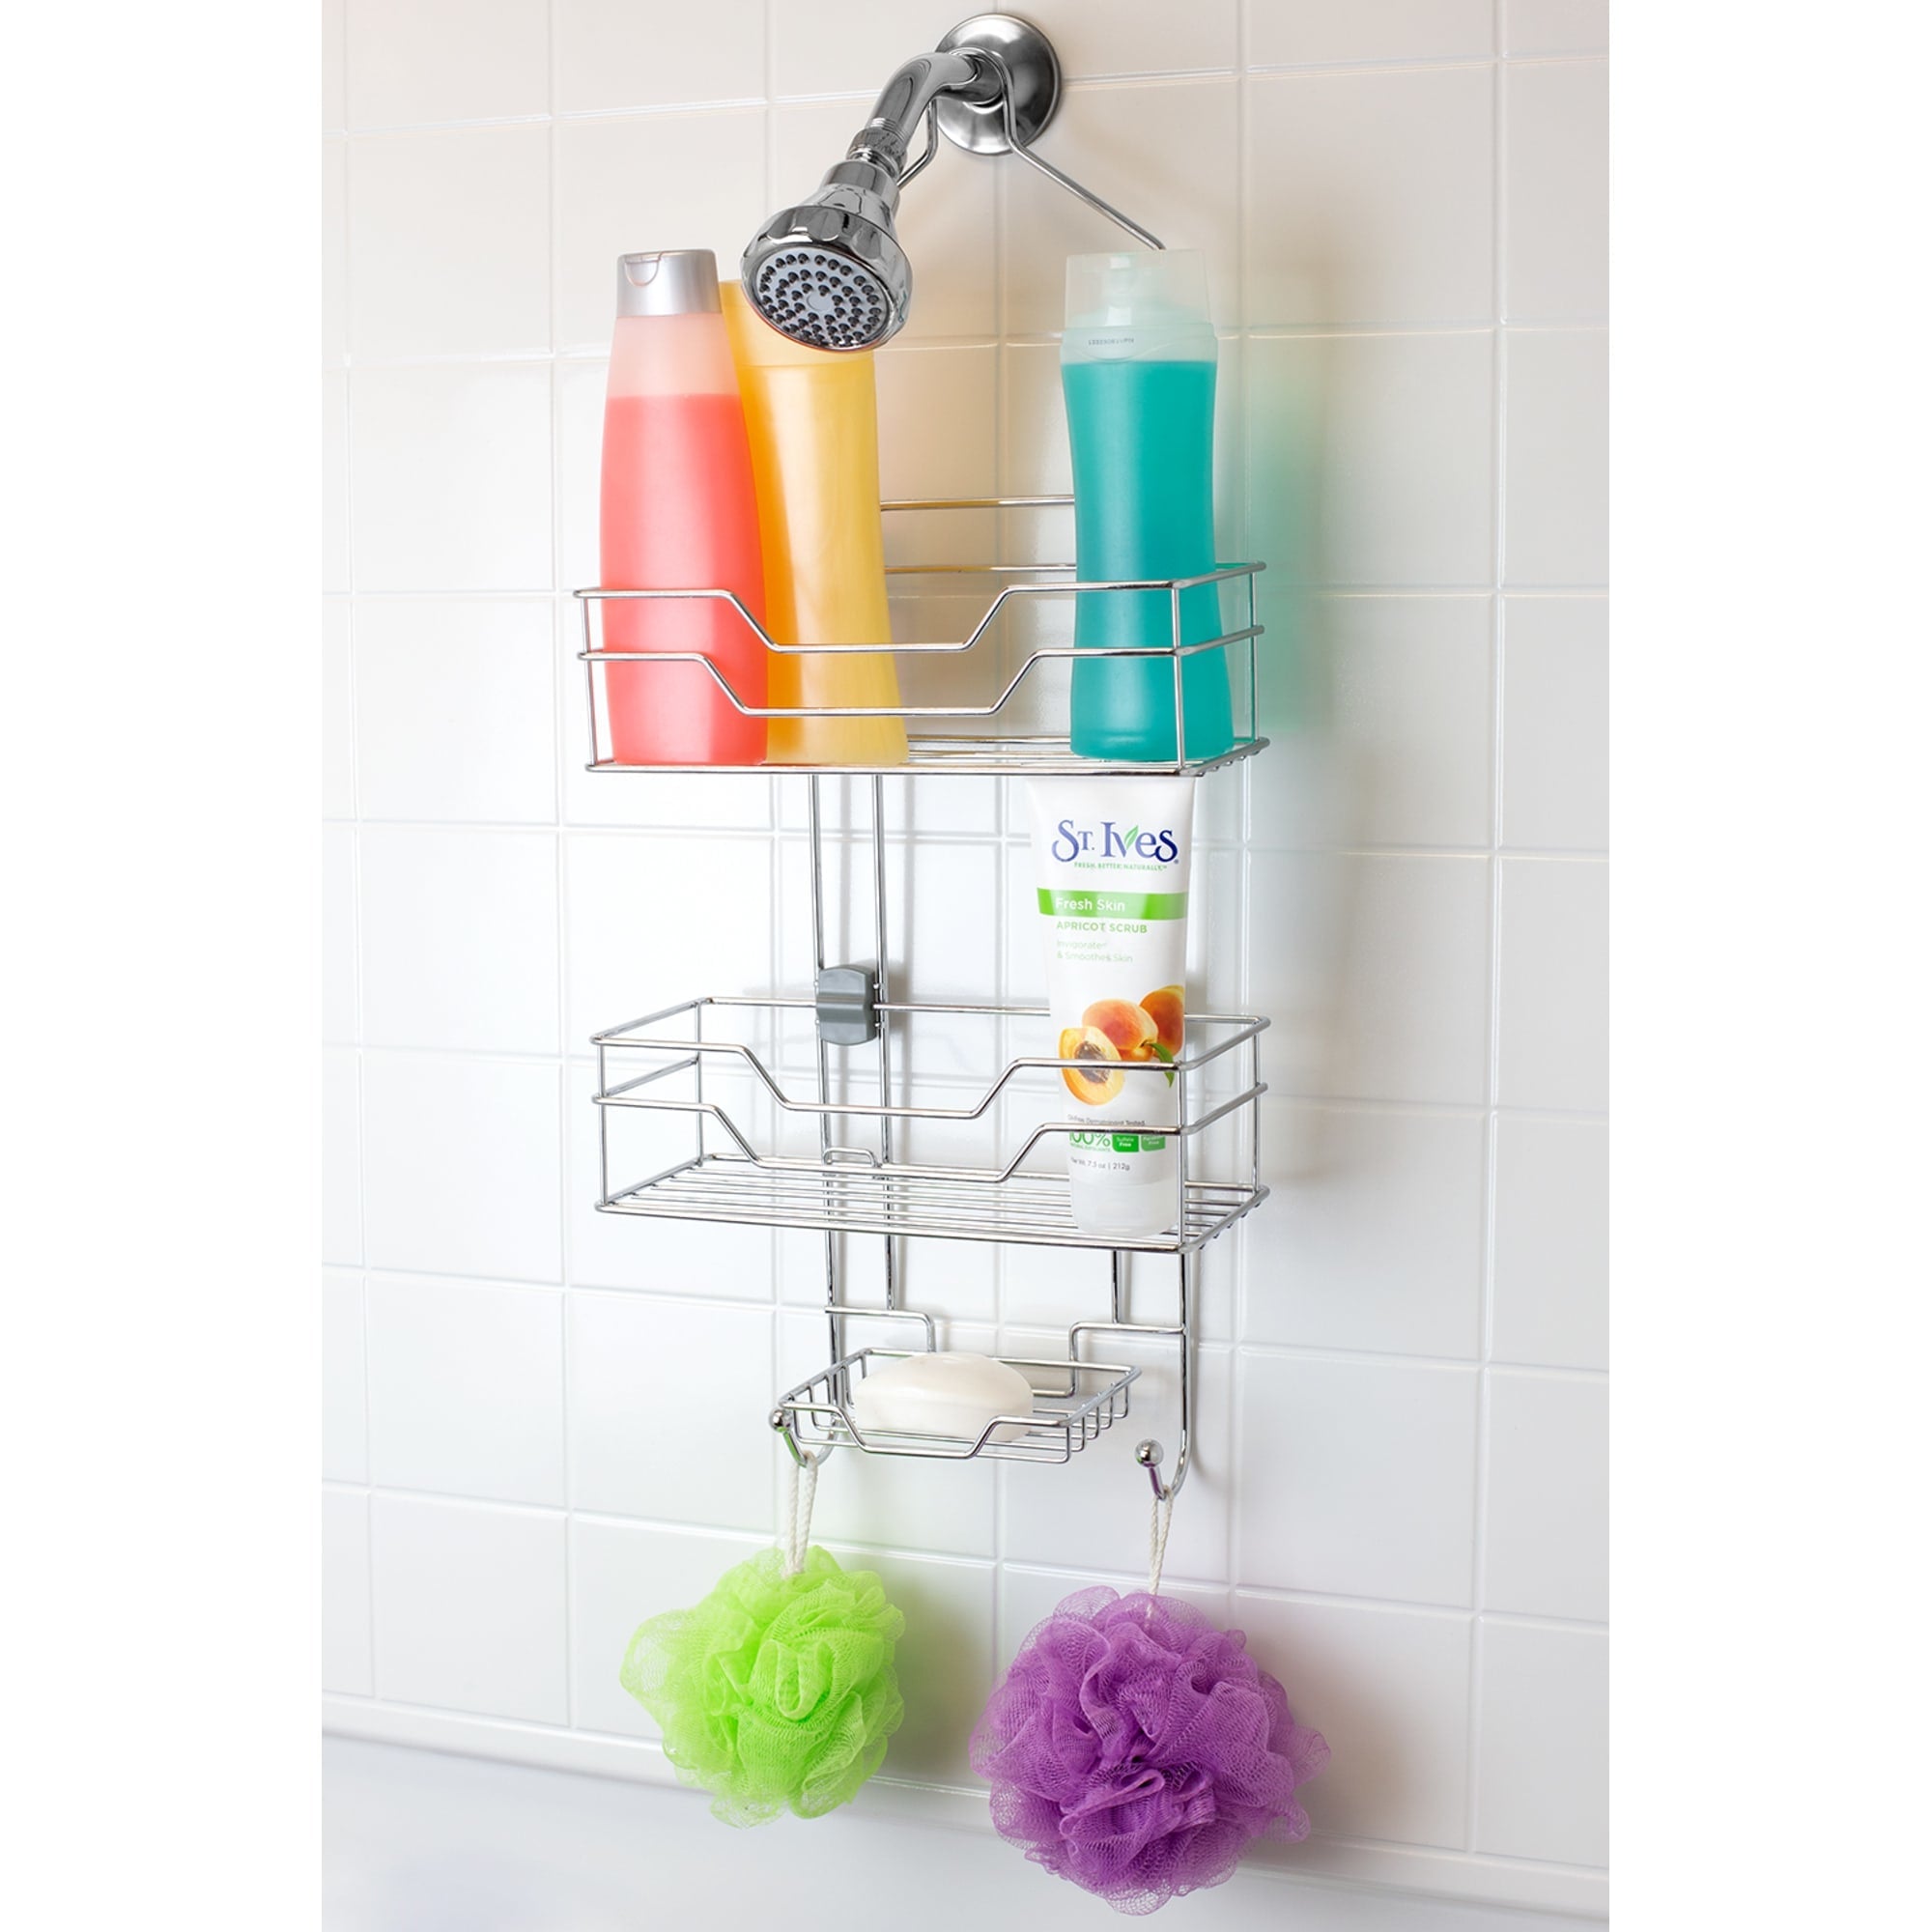 Home Basics Unity 2 Tier Shower Caddy with Bottom Hooks and Center